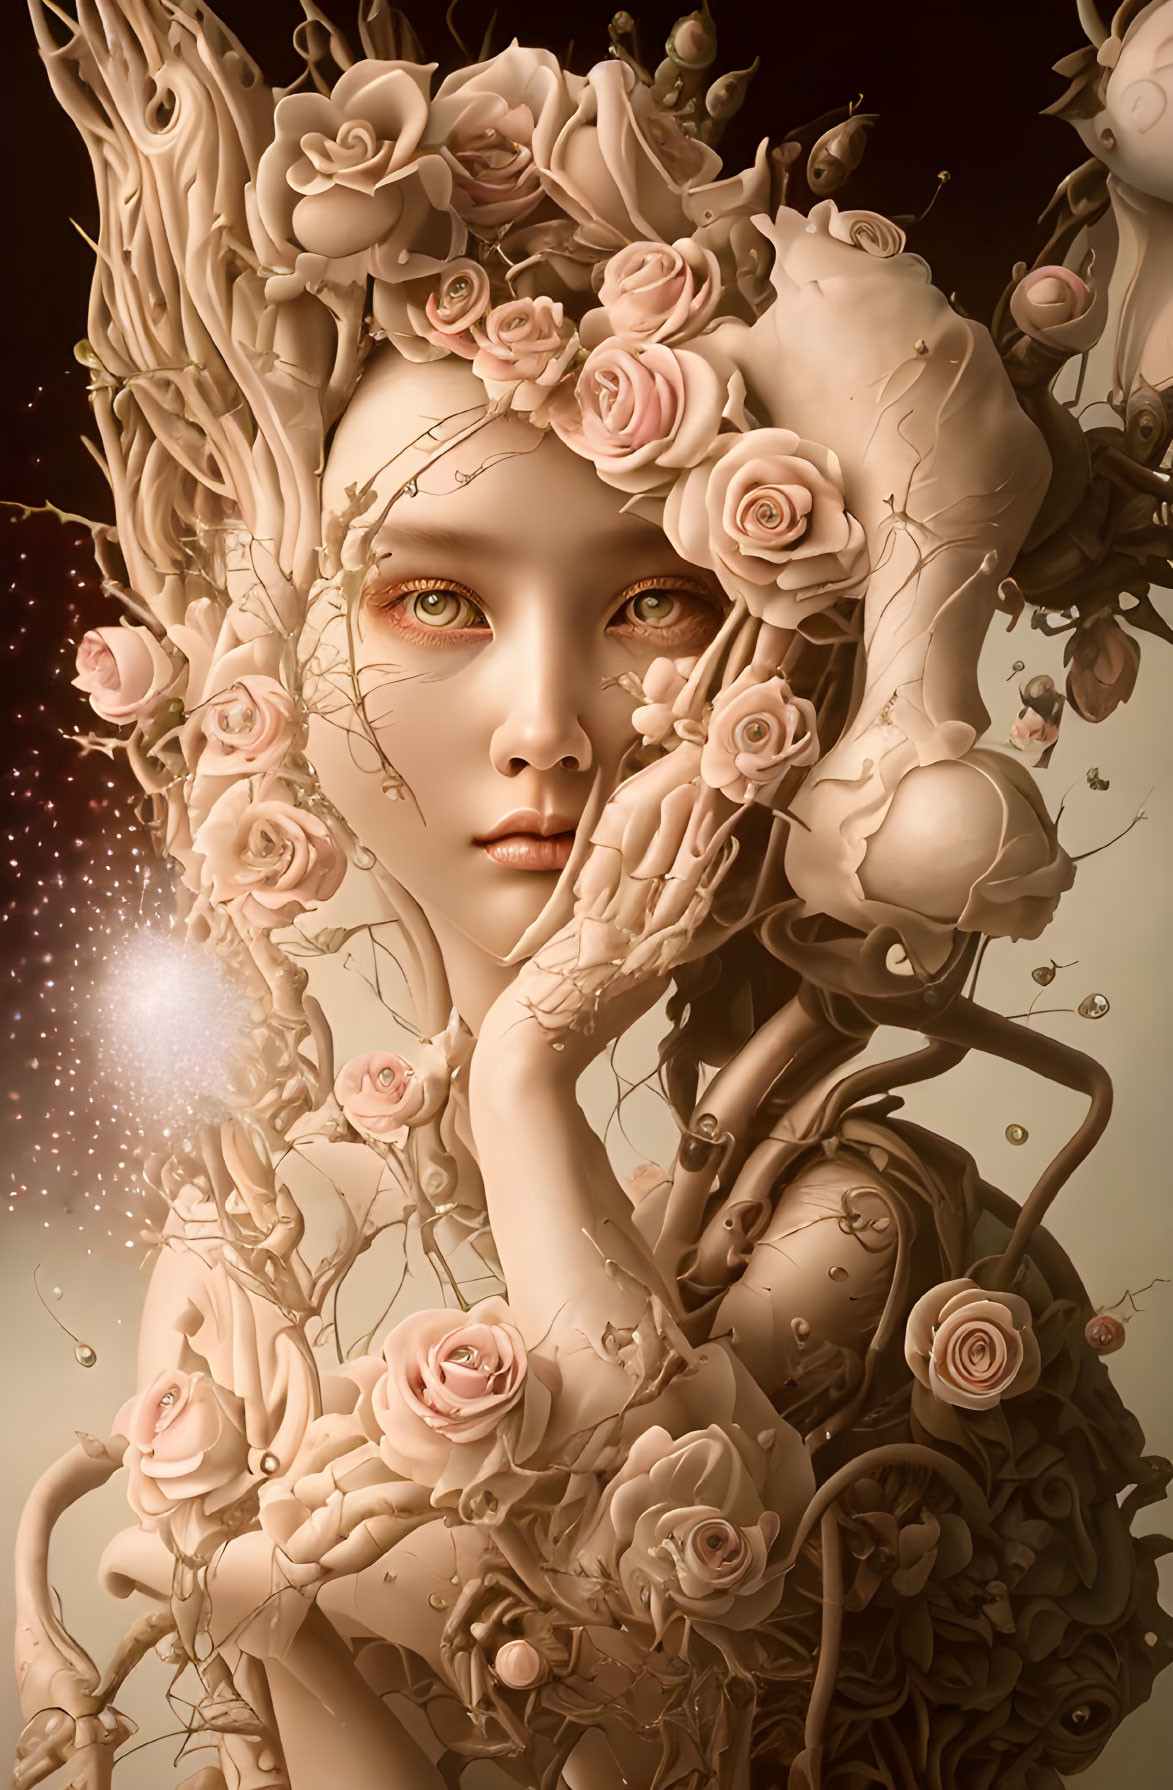 Mystical figure with floral and tree-like elements and captivating amber eyes